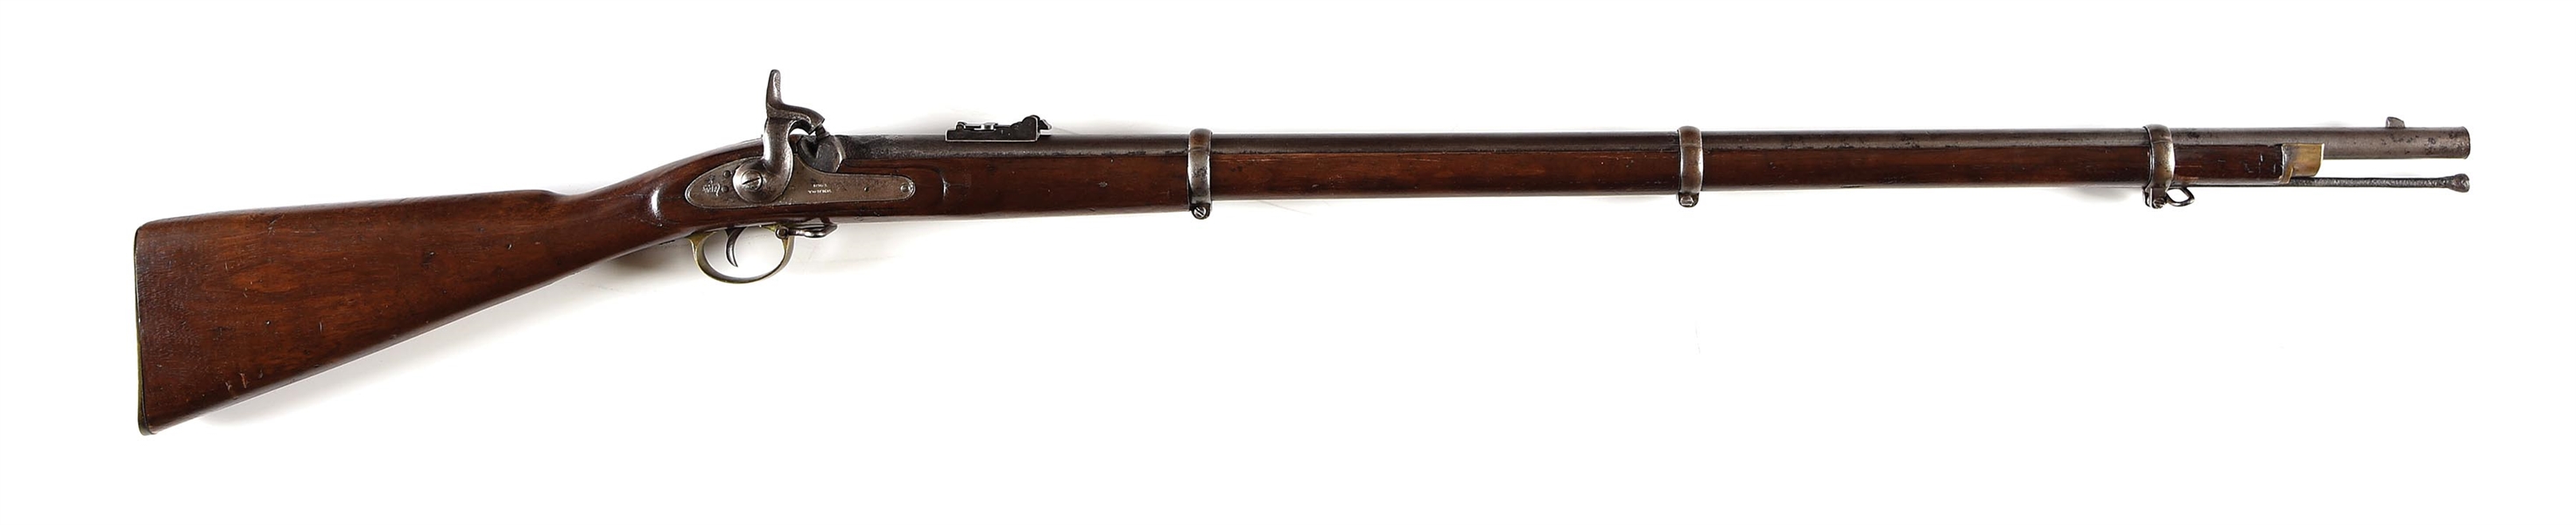 (A) TOWER P-1853 ENFIELD PERCUSSION MUSKET.